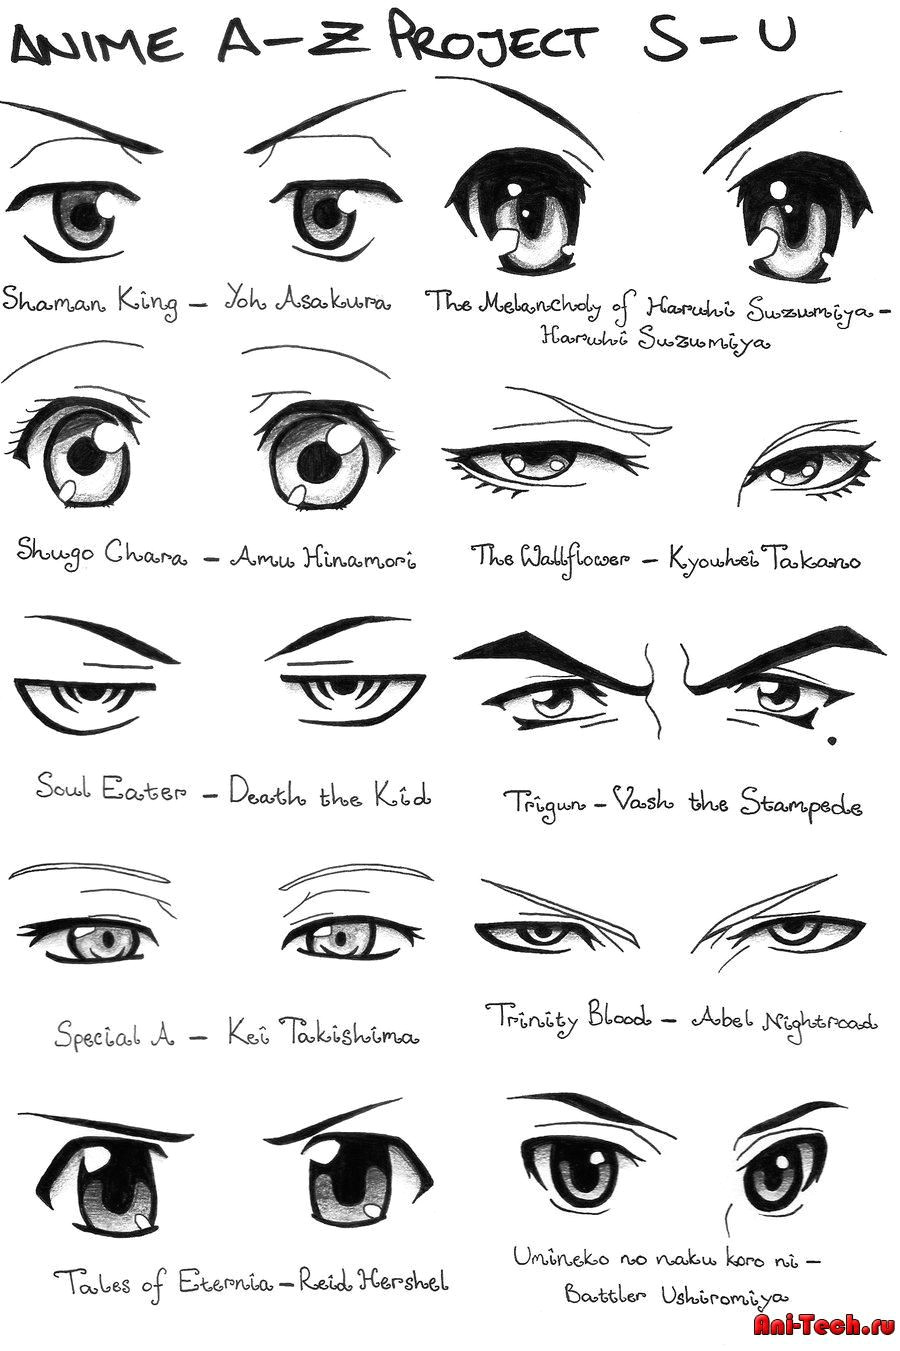 Drawing Easy Anime Eyes Pin by Maria Polischuk On N D N N Dµd Don D N Dod D D D D D D D Drawings Anime